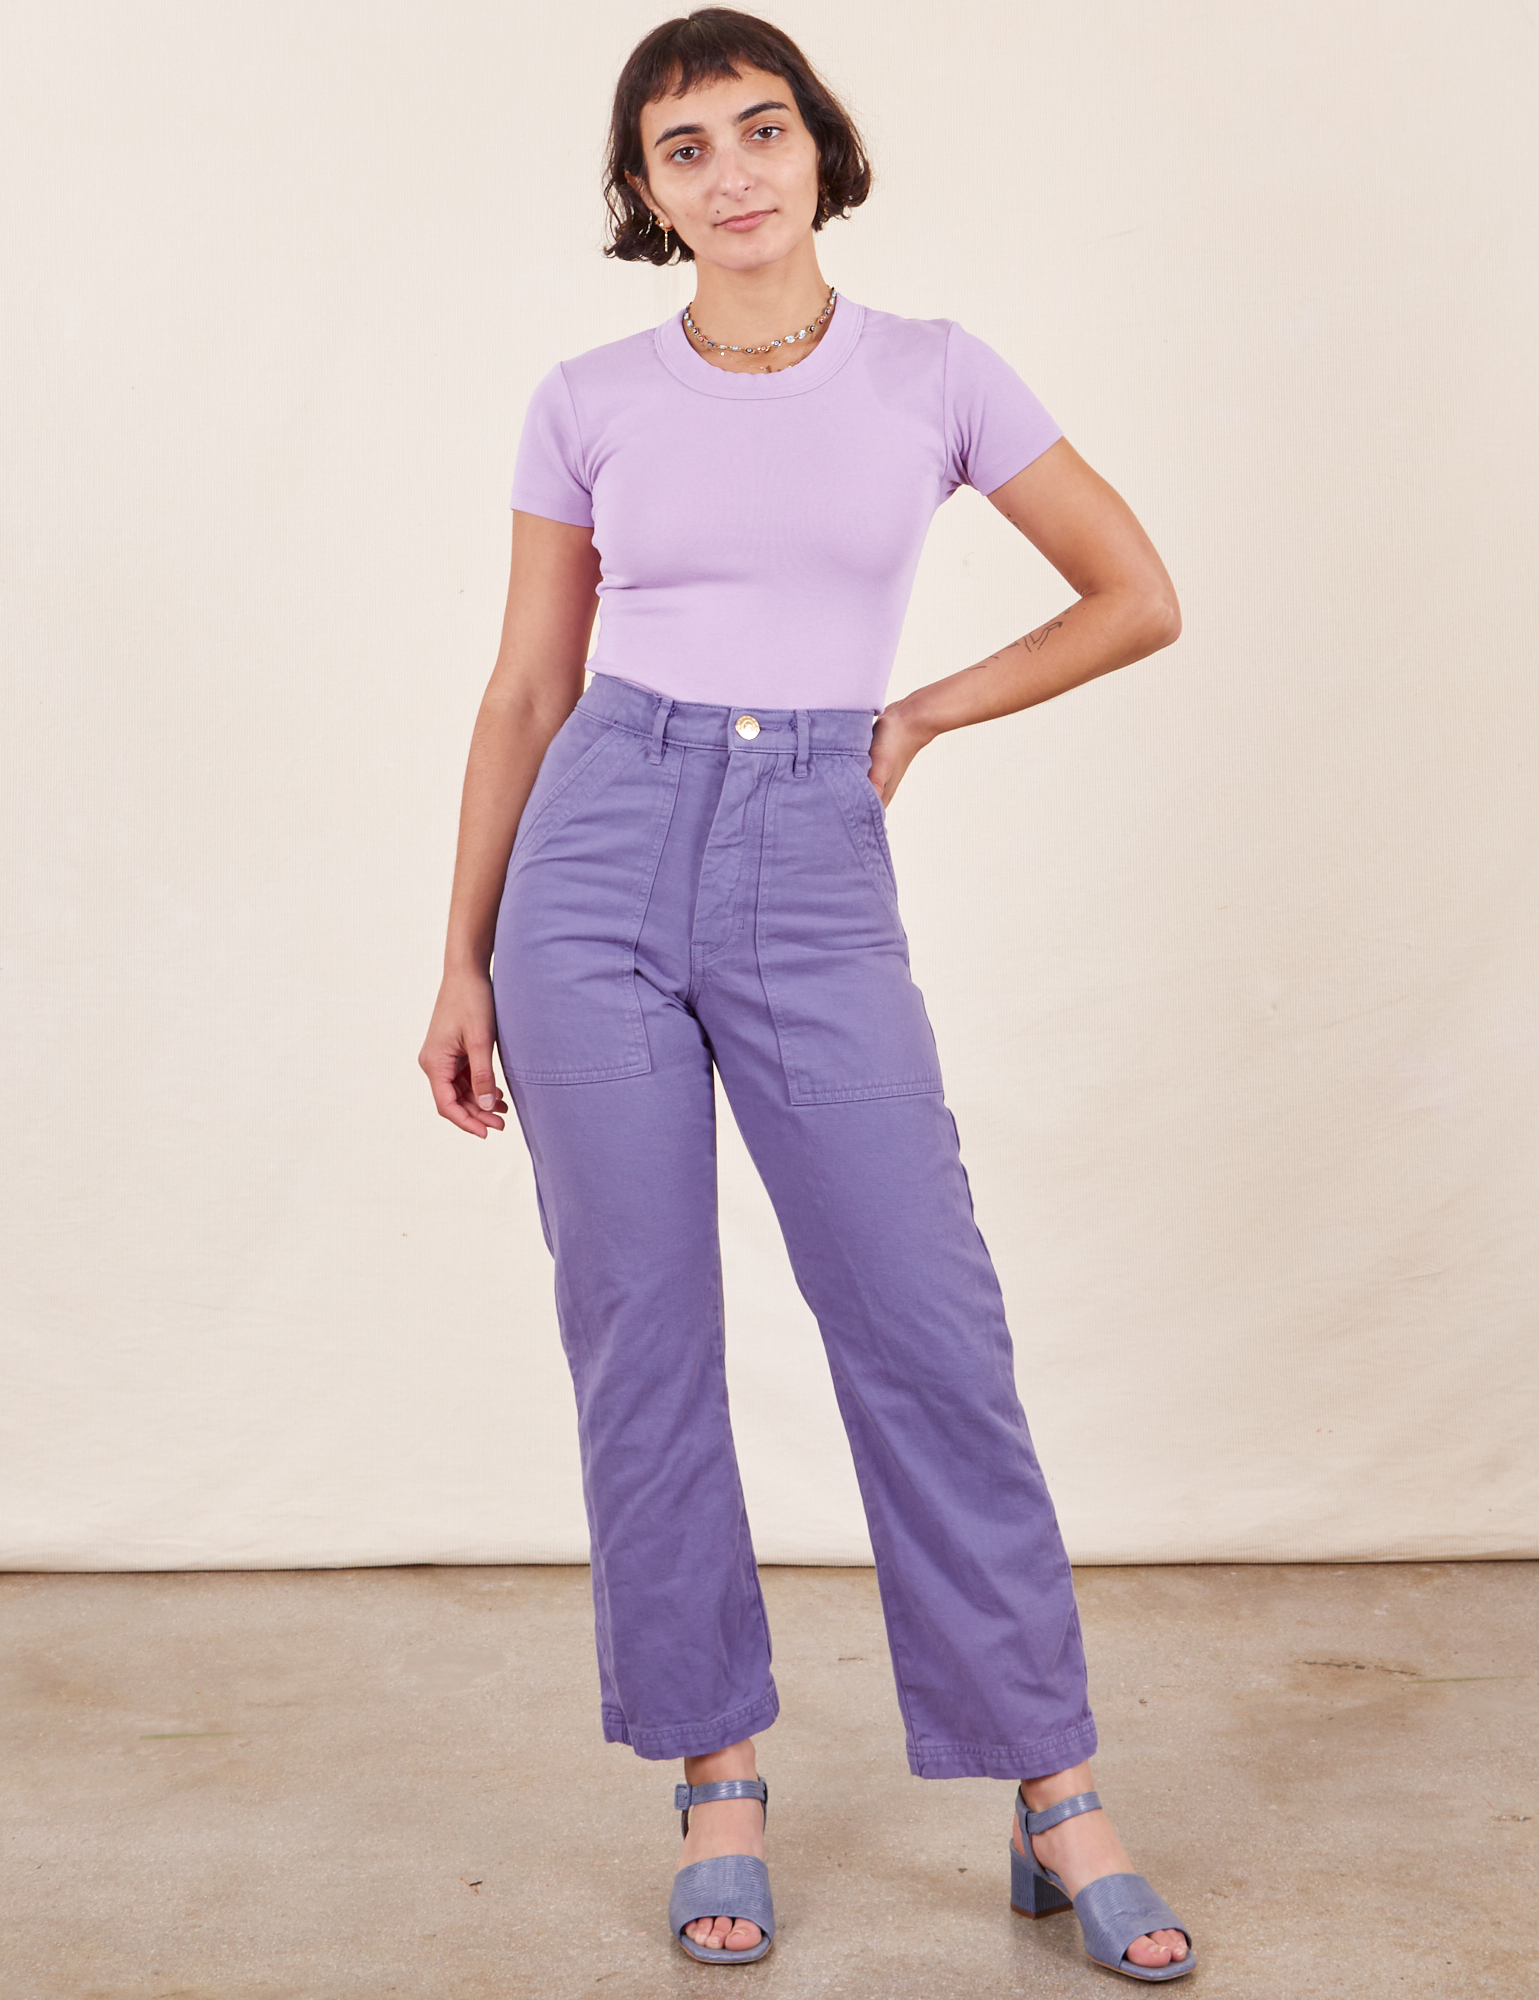 Soraya is 5&#39;2&quot; and wearing Petite XXS Work Pants in Faded Grape paired with lilac purple Baby Tee